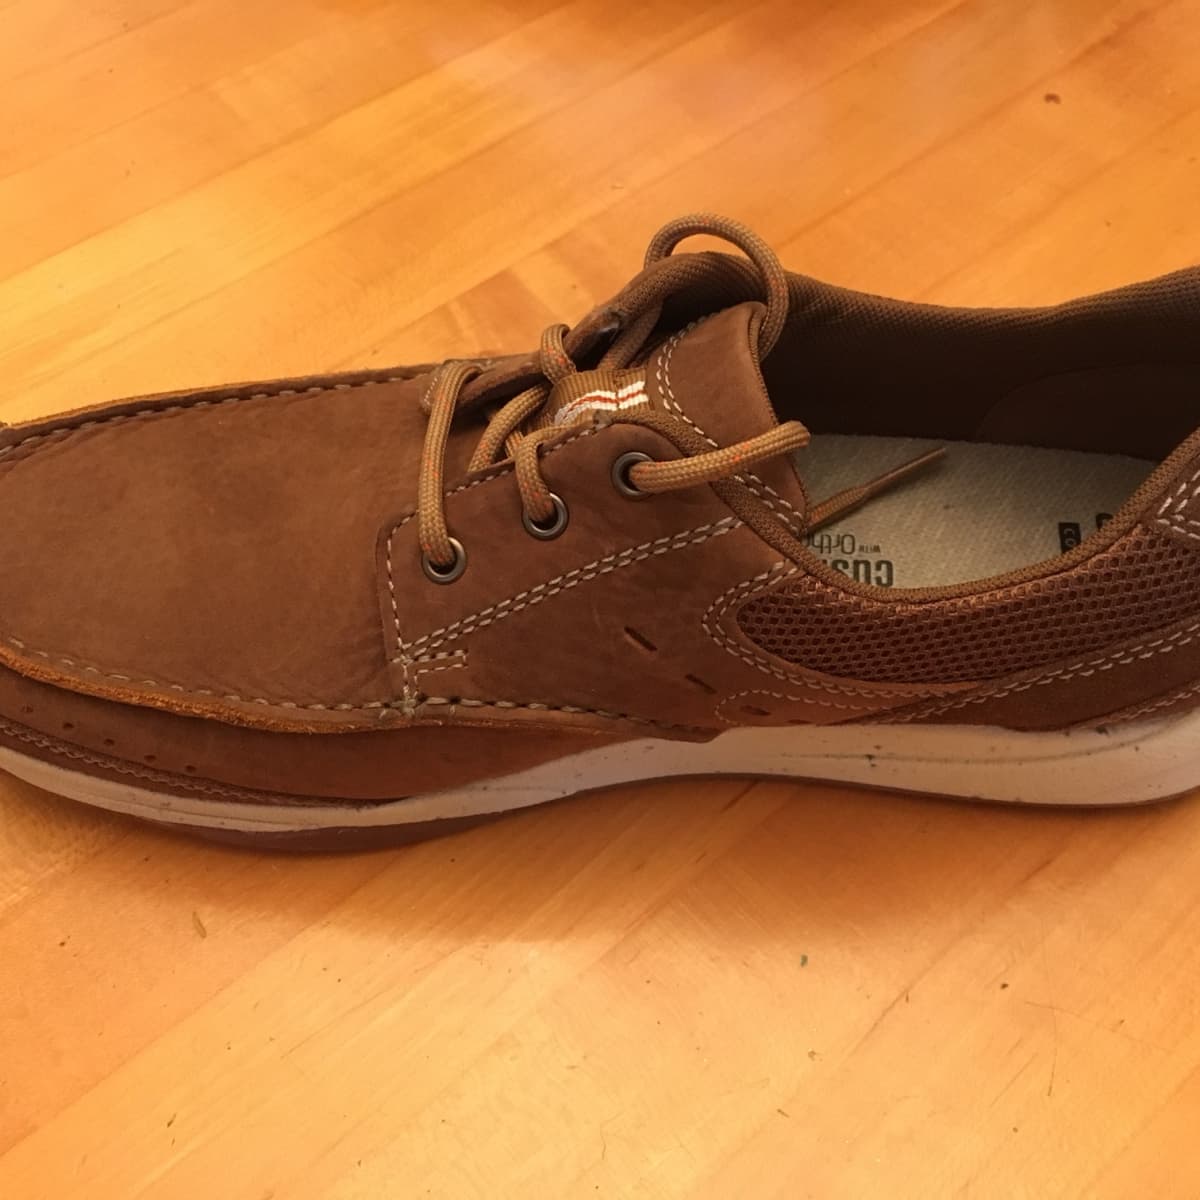 My Review of Clarks Shoes: Footwear -